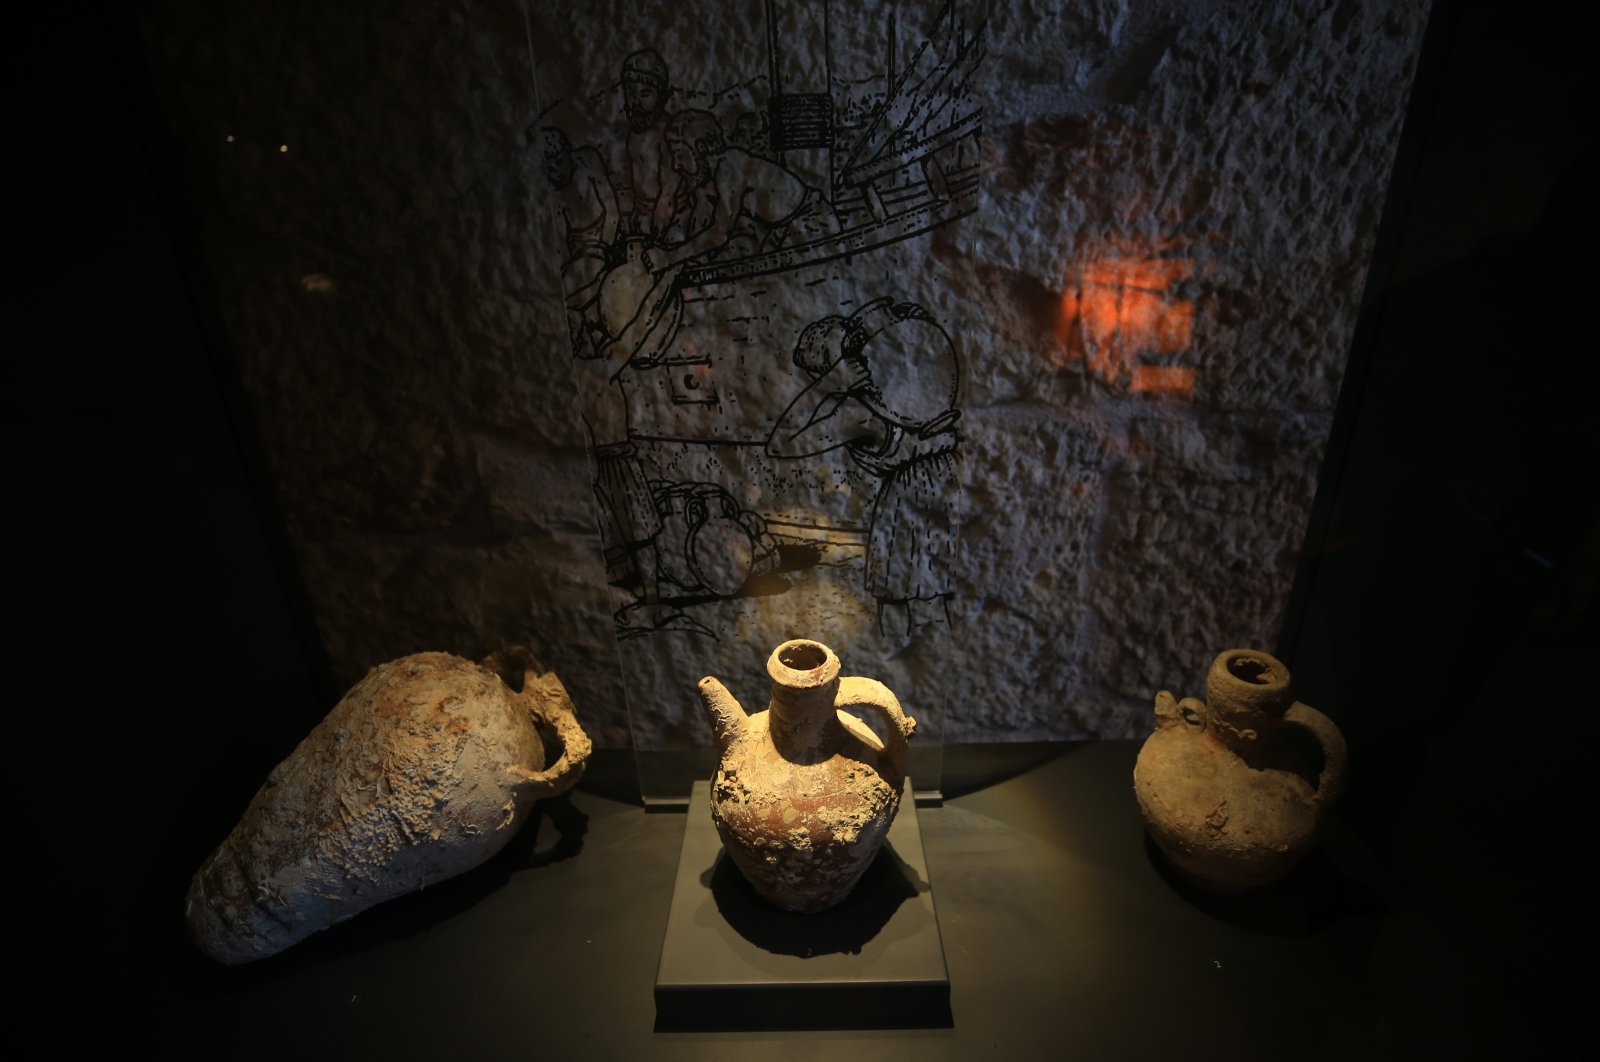 Artifacts from the Lycian civilizations are on display at the Museum of Lycian Civilizations, Antalya, southern Turkey, April 27, 2021. (AA Photo)